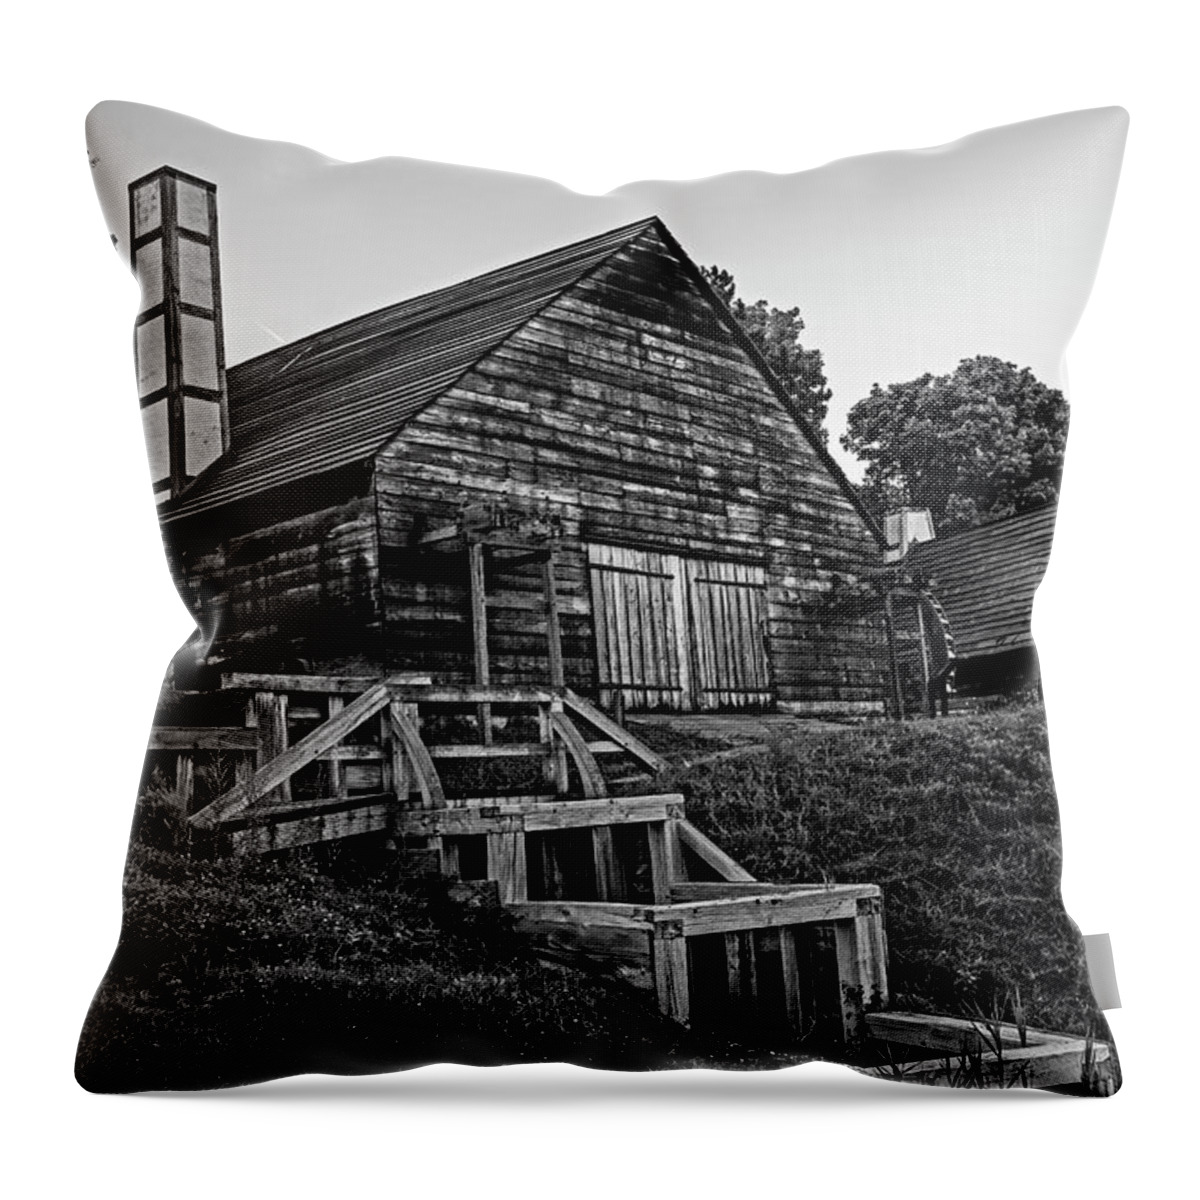 Saugus Throw Pillow featuring the photograph Saugus Iron Works National Park Saugus Massachusetts Mills wooden buildings Black and White by Toby McGuire